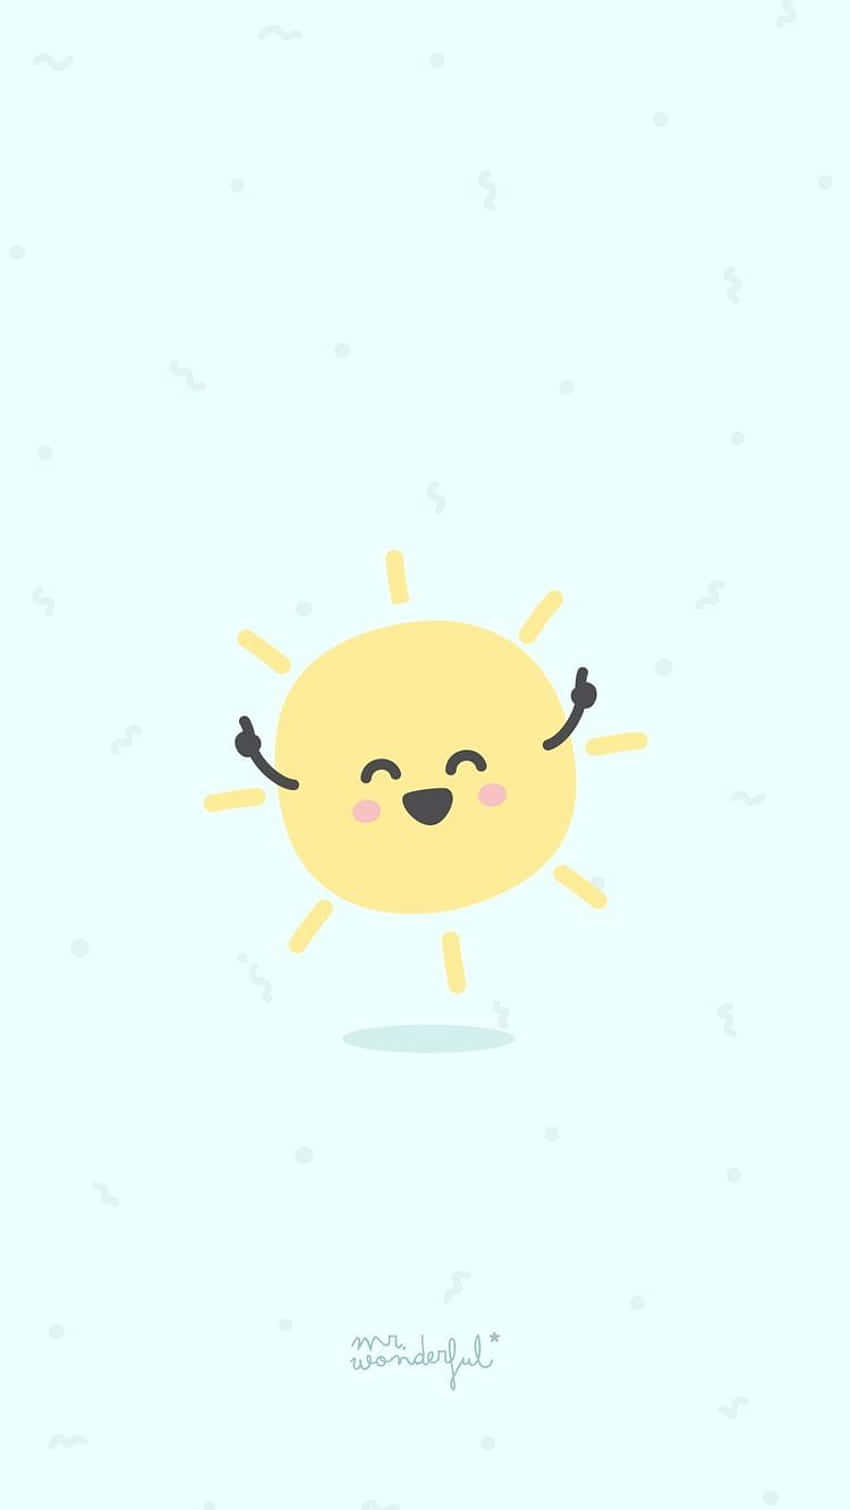 A Cartoon Sun With His Arms Up In The Air Background